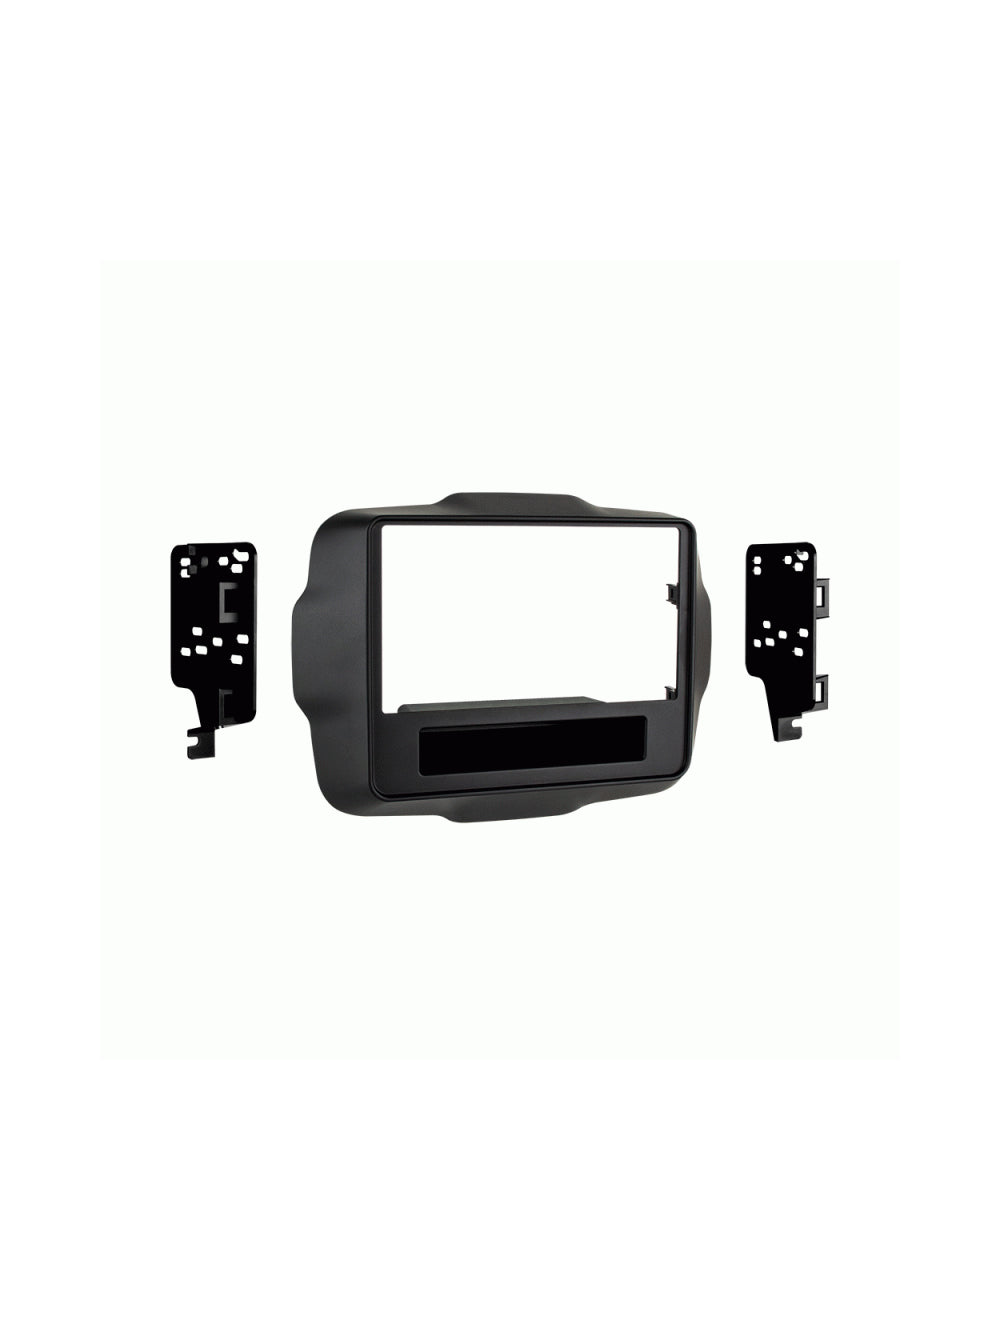 Metra 95-6532B Double DIN Dash Kit for 2015-Up Jeep Renegade Black